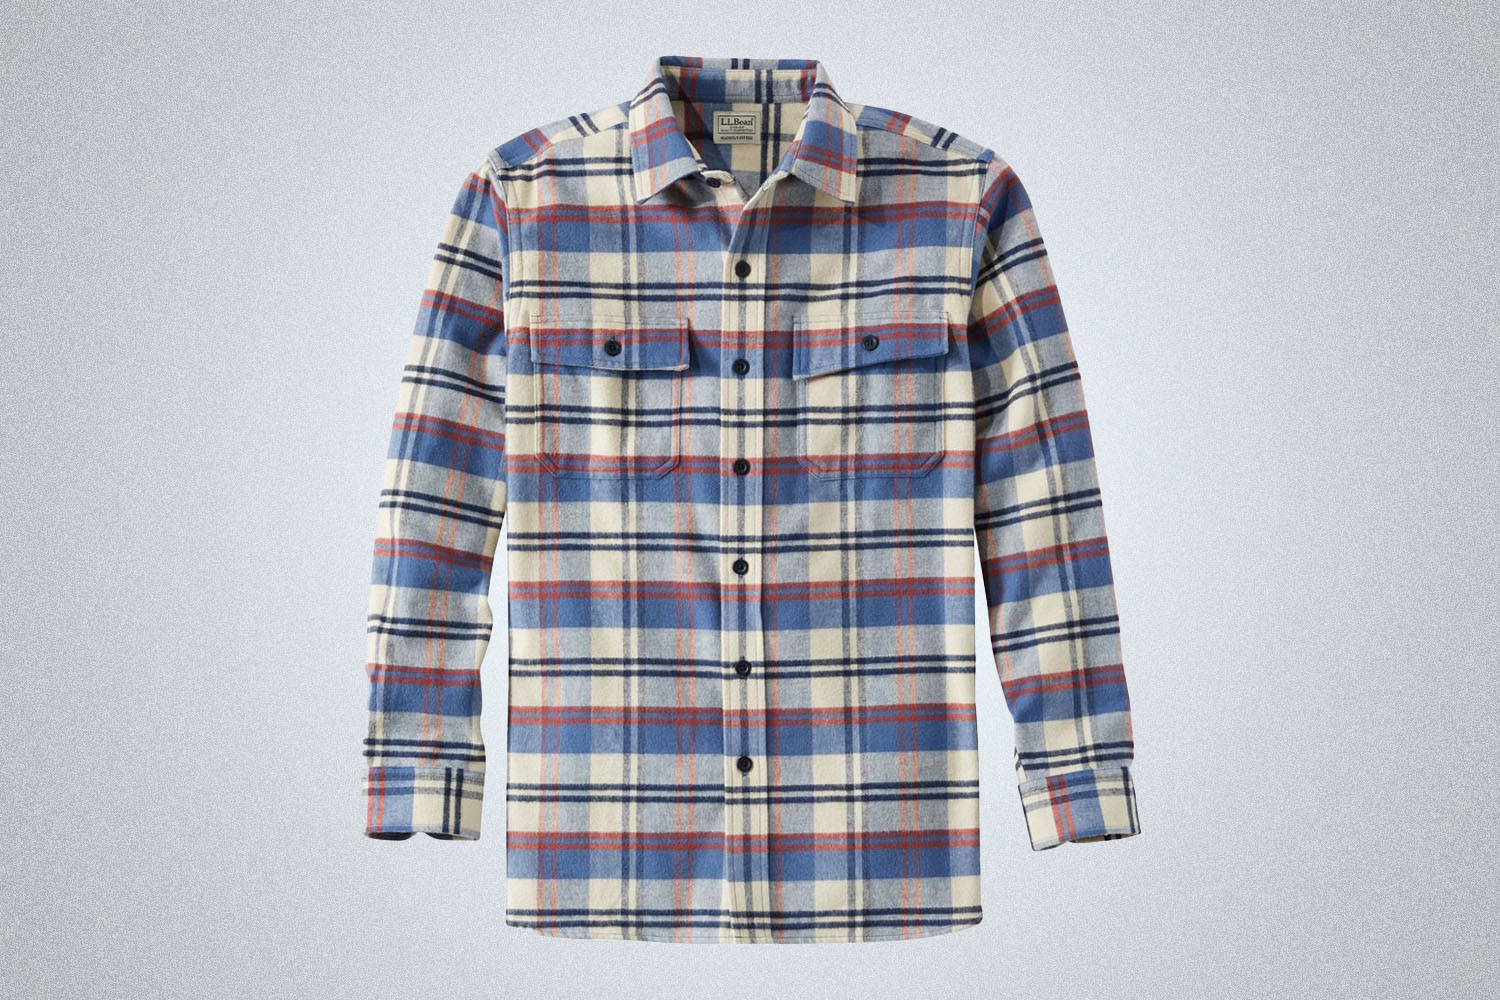 a white, blue and red chamois shirt